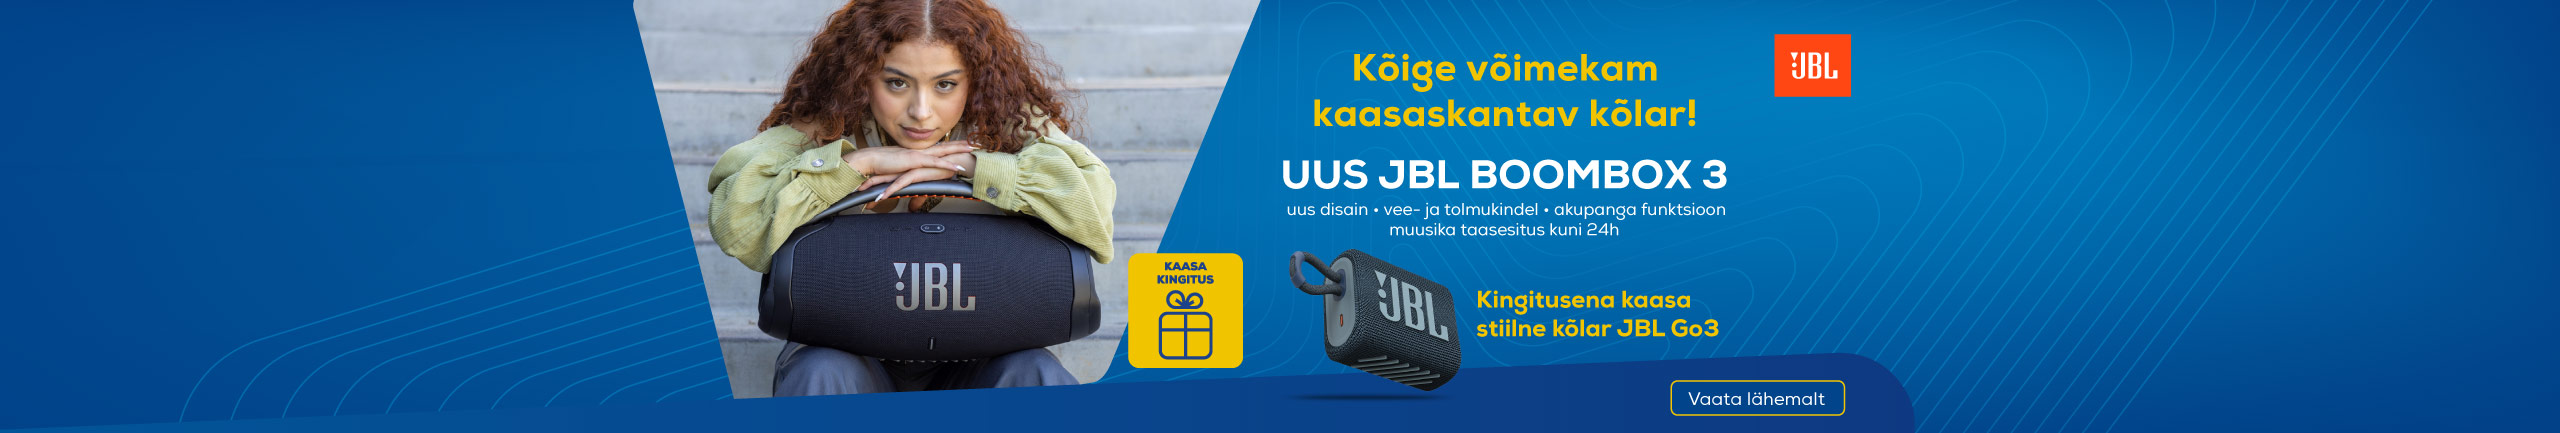 Buy new JBL Boombox 3 and get JBL Go3 speaker as a complimentary gift!